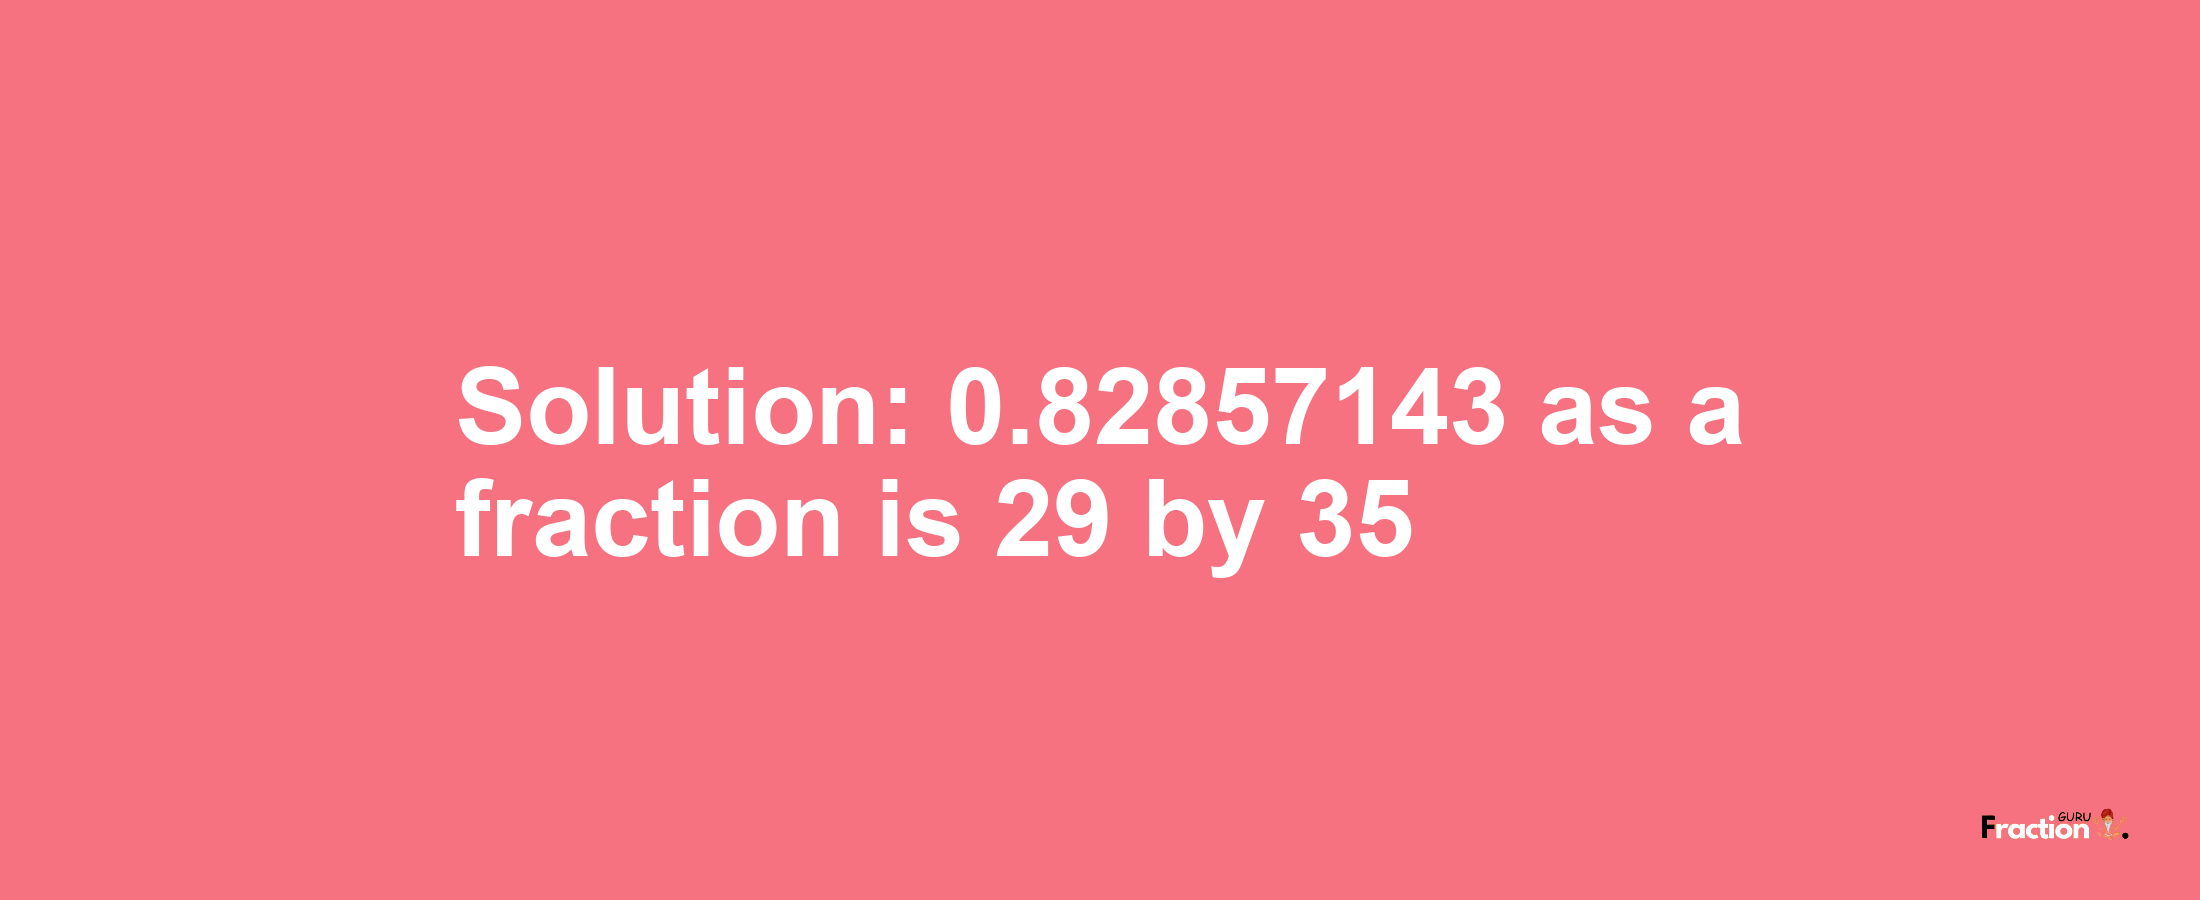 Solution:0.82857143 as a fraction is 29/35